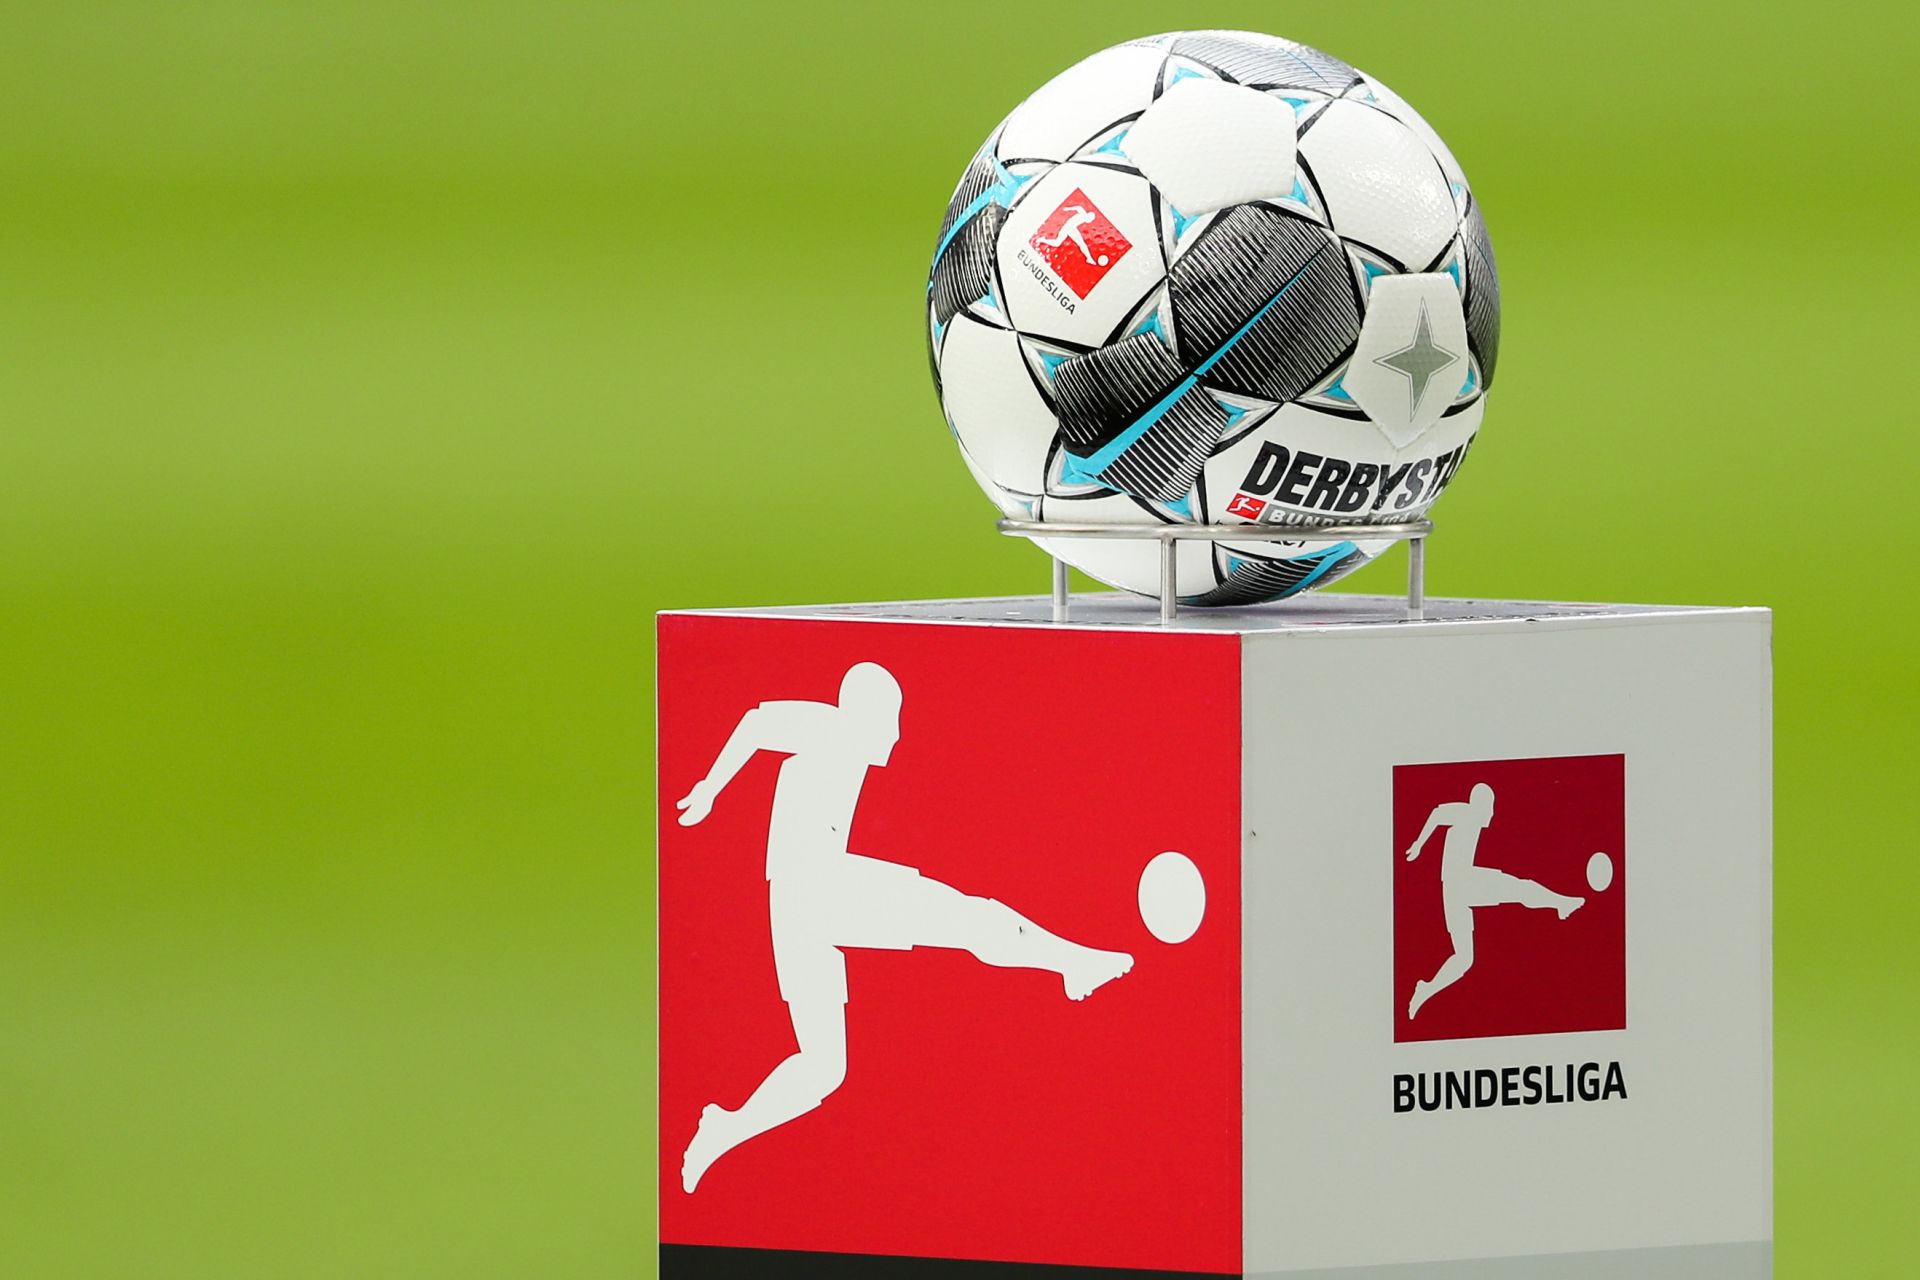 FILED - 28 September 2019, Saxony, Leipzig: The match ball lies on a podium prior to the start of the German Bundesliga soccer match between RB Leipzig and FC Schalke 04 at the Red Bull Arena. The German football league (DFL) has suggested suspending the Bundesliga and second division from next week until April 2 due to the coronavirus. Photo: Jan Woitas/dpa-Zentralbild/dpa